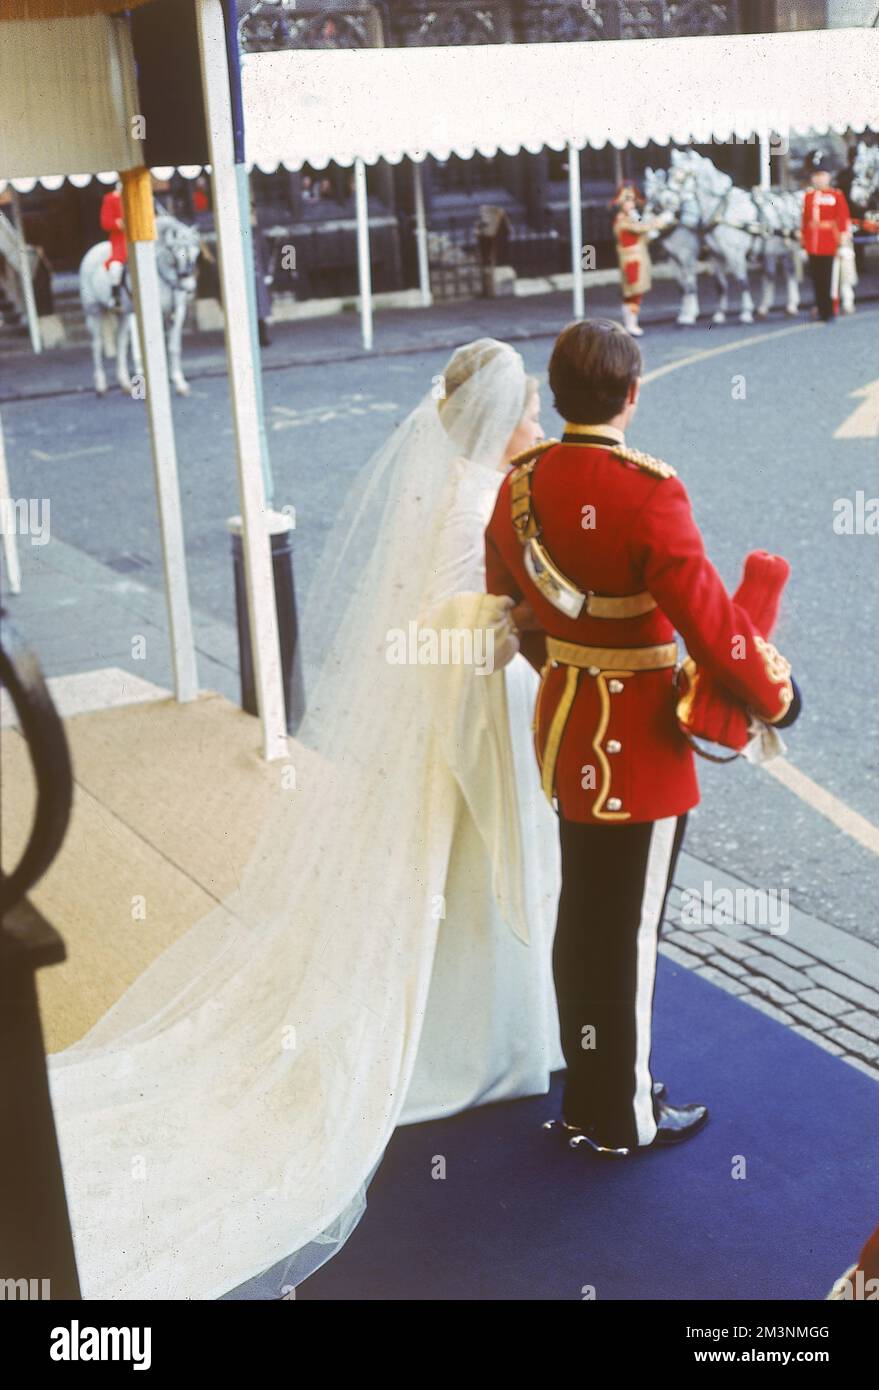 The Marriage of Princess Anne to Mark Phillips, a Lieutenant in the 1st Queen's Dragoon Guards, at Westminster Abbey on 14th November 1973. The couple prepare to leave the Abbey after the ceremony by horse-drawn carriage.     Date: 1973 Stock Photo